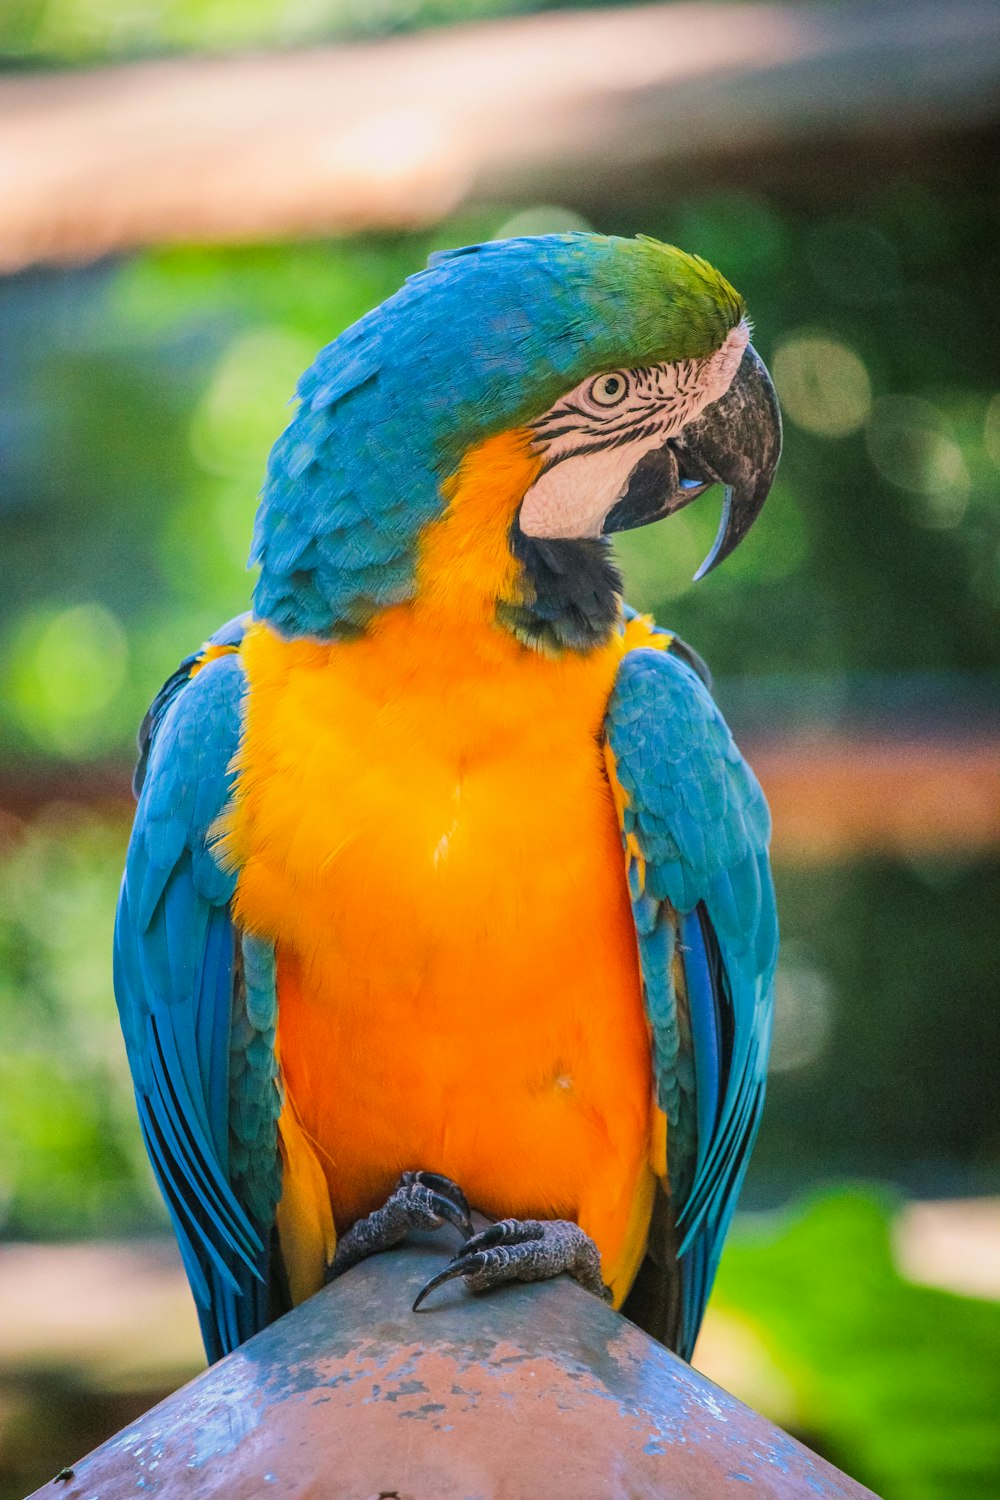 a blue and yellow parrot sitting on top of a metal pole